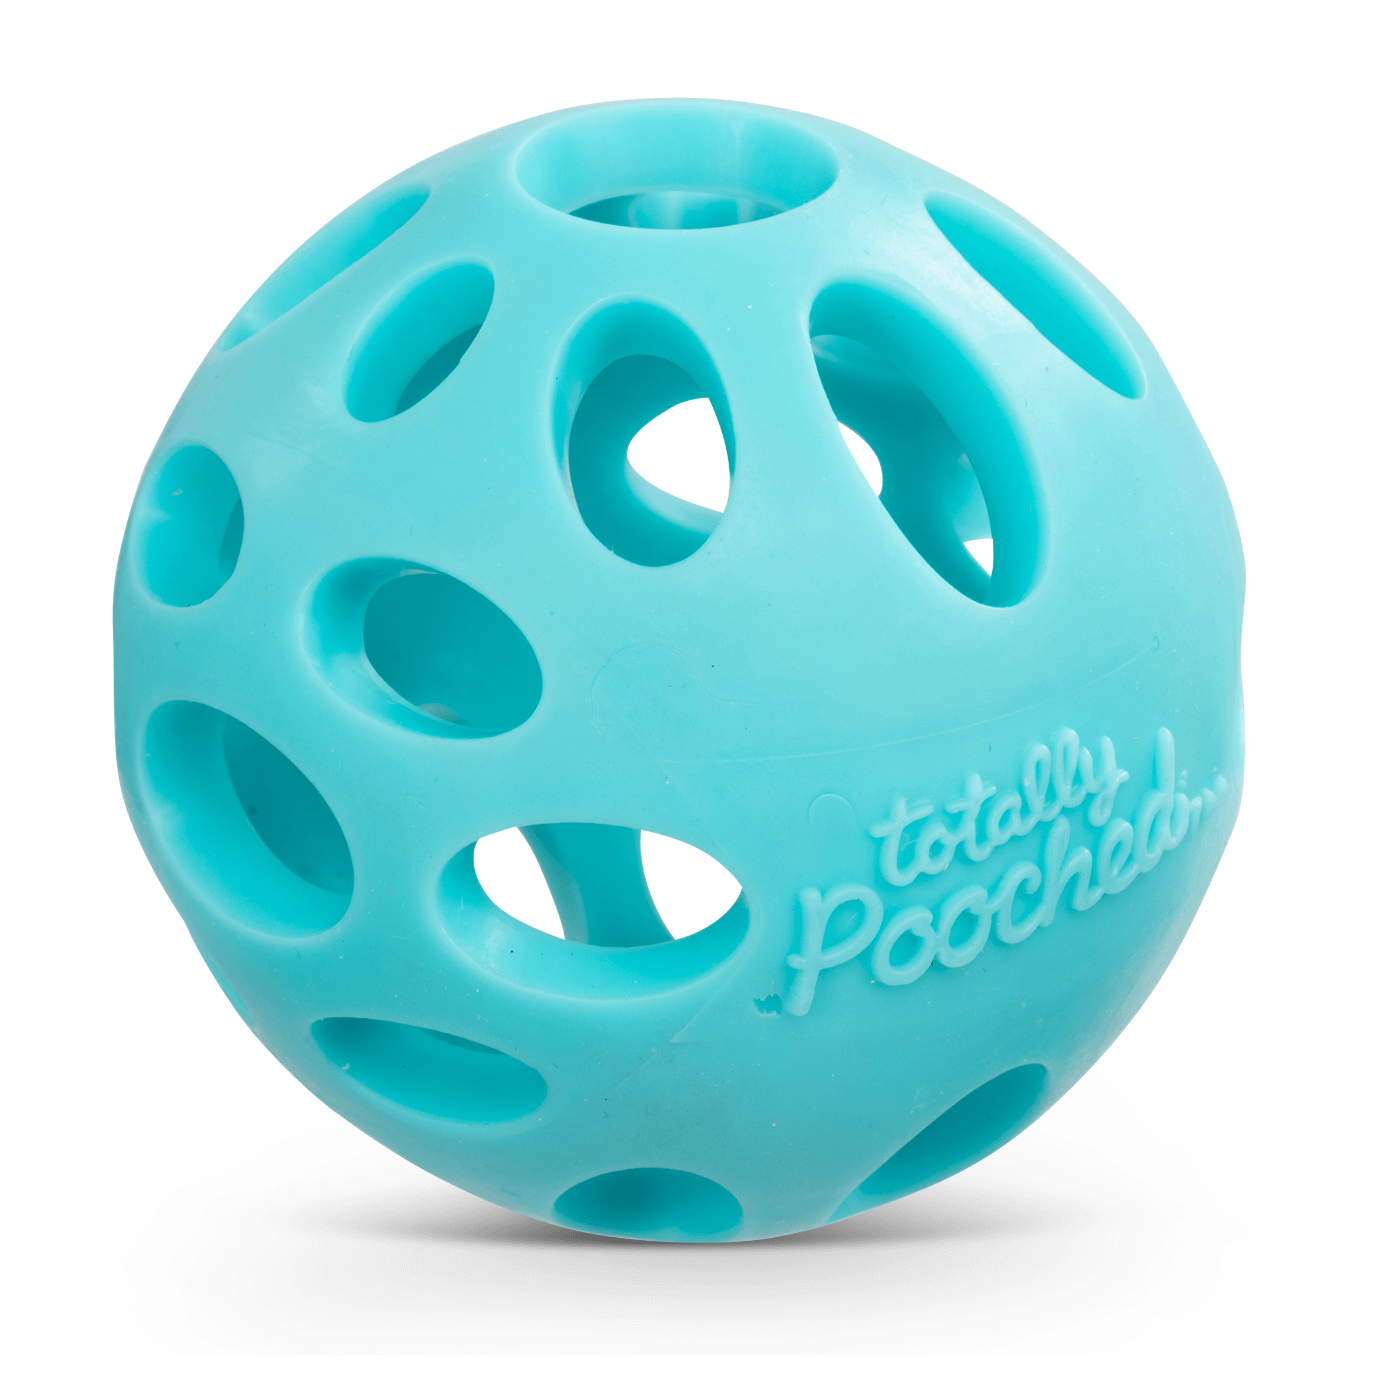 Teal ball for dogs to chase.  It floats and is lightweight.  Dishwasher safe. 